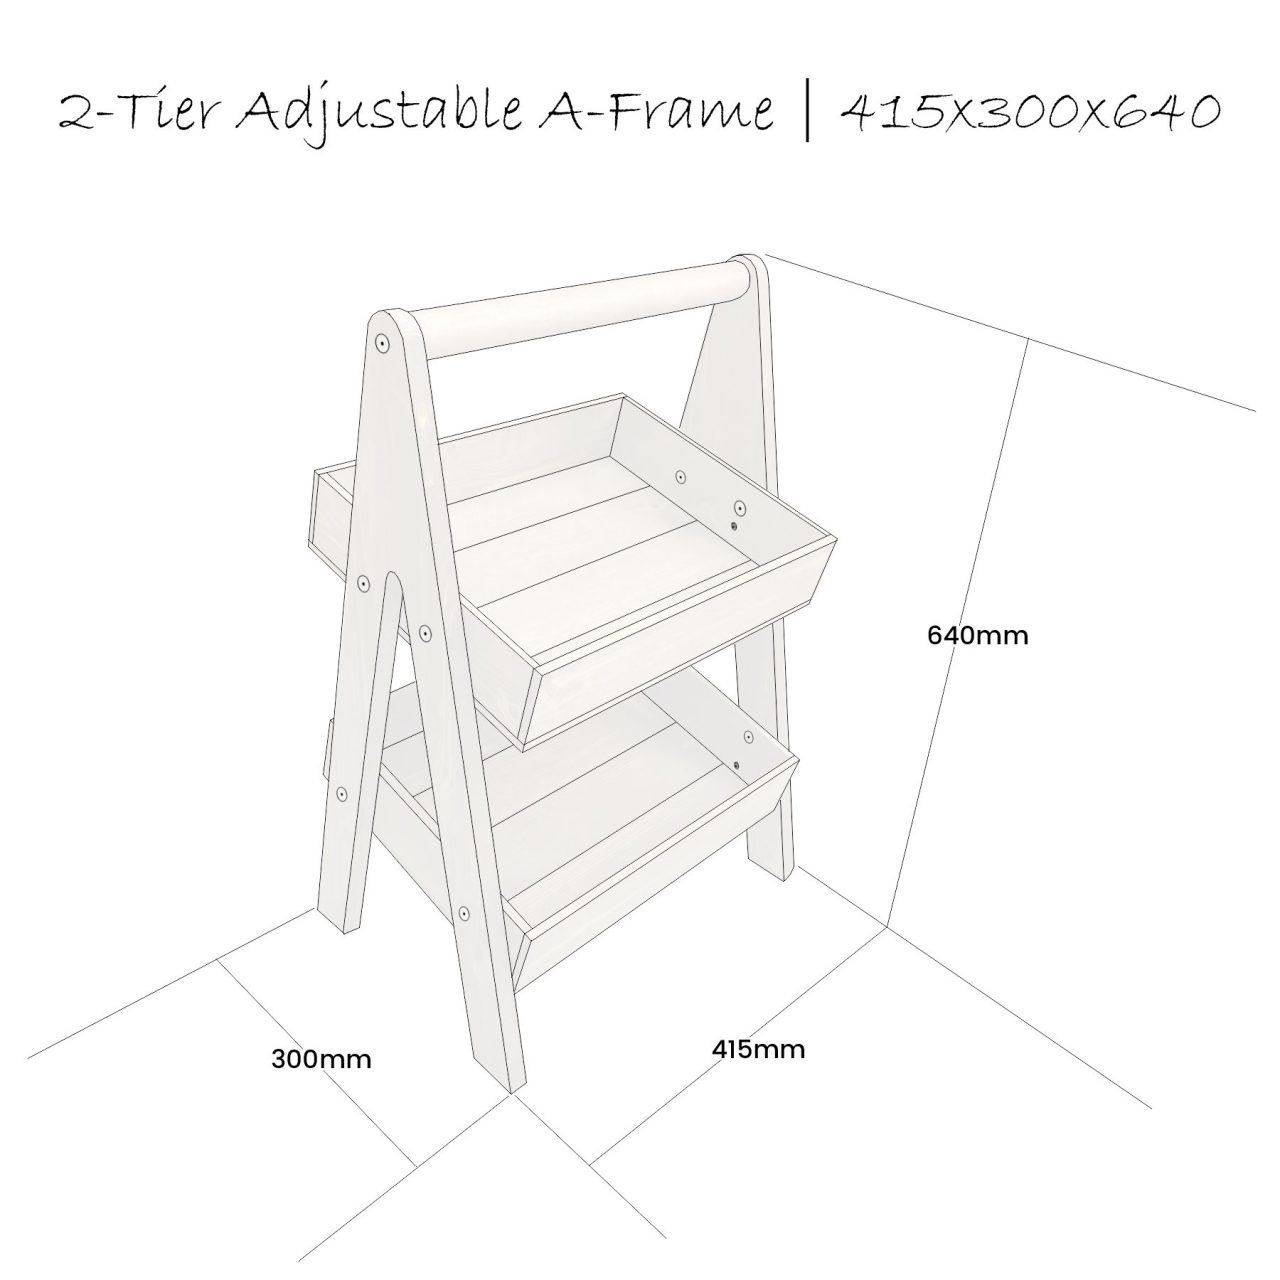 2-Tier Adjustable Wooden A-Frame Display Stand 415x300x640 Schematic